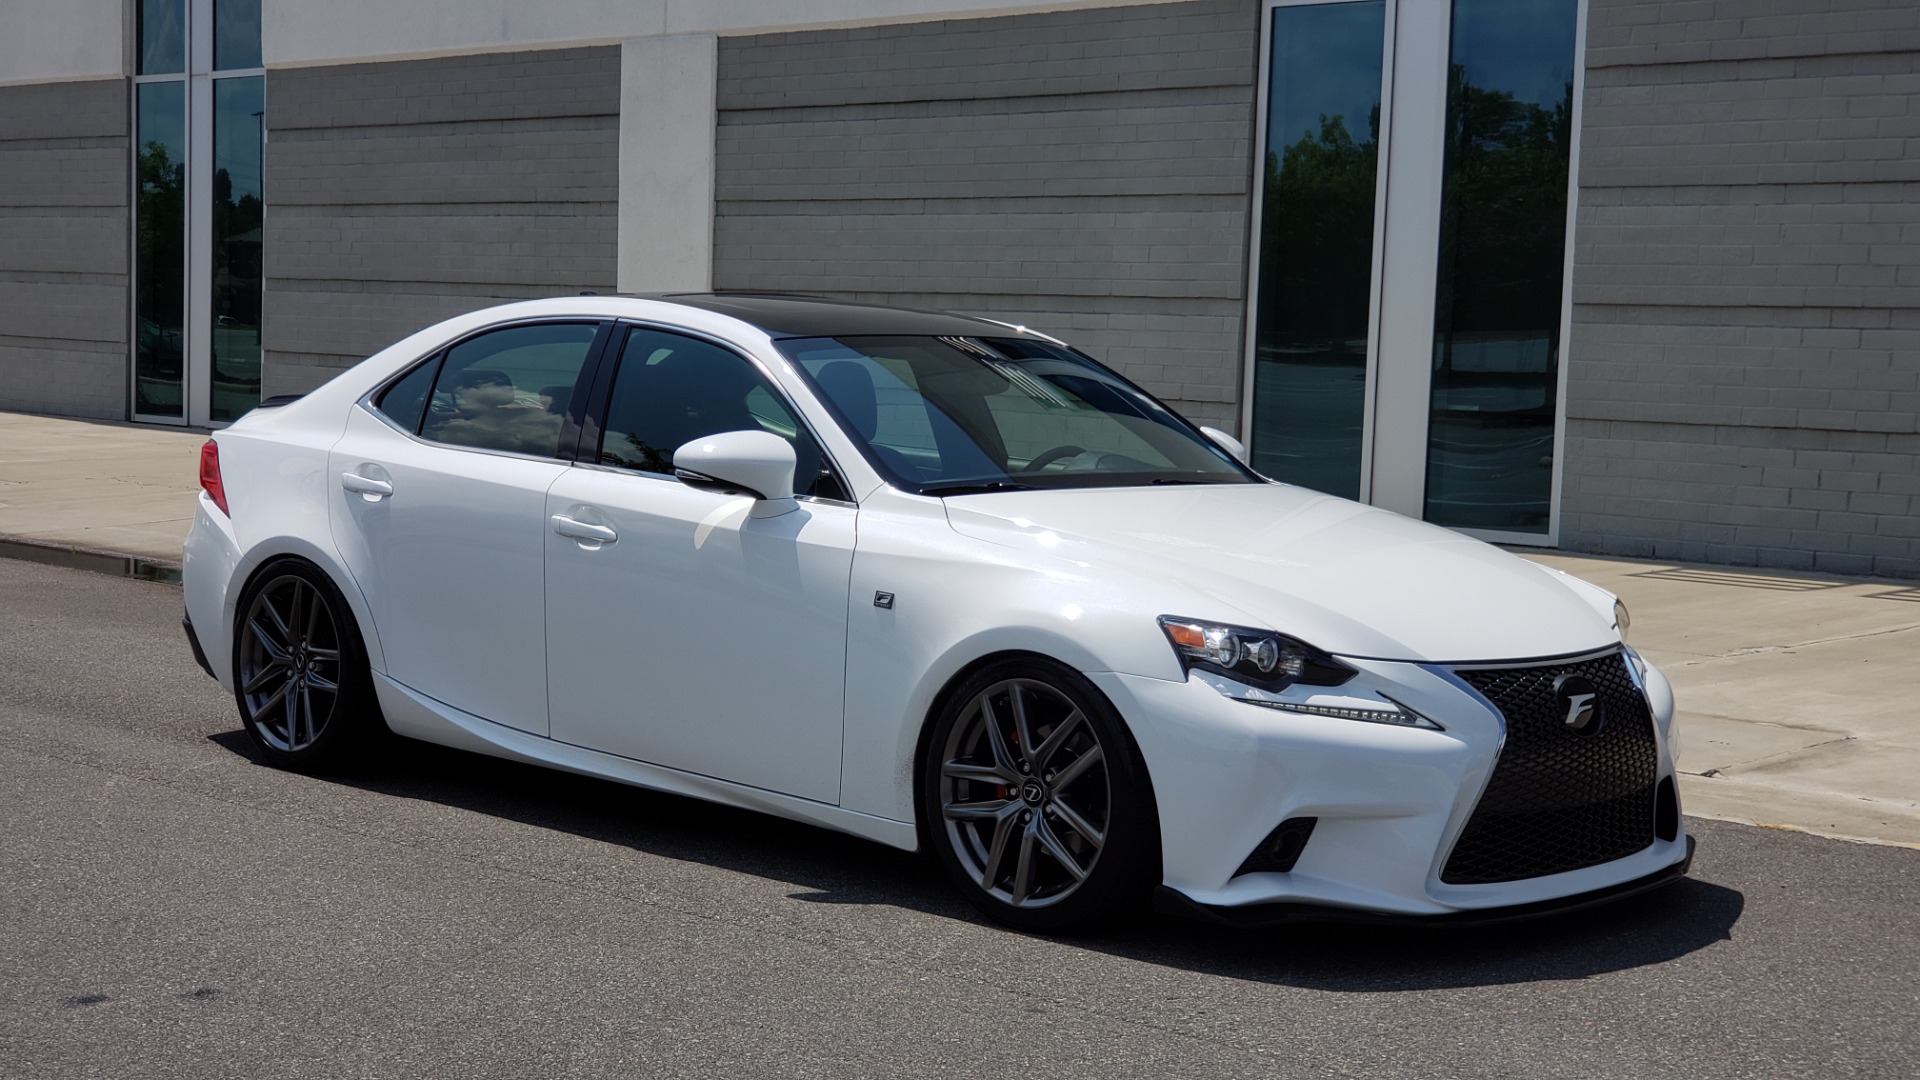 Used 2014 Lexus IS 250 F-SPORT SEDAN / BLIND SPOT MONITOR / REARVIEW / 18IN WHEELS for sale Sold at Formula Imports in Charlotte NC 28227 8